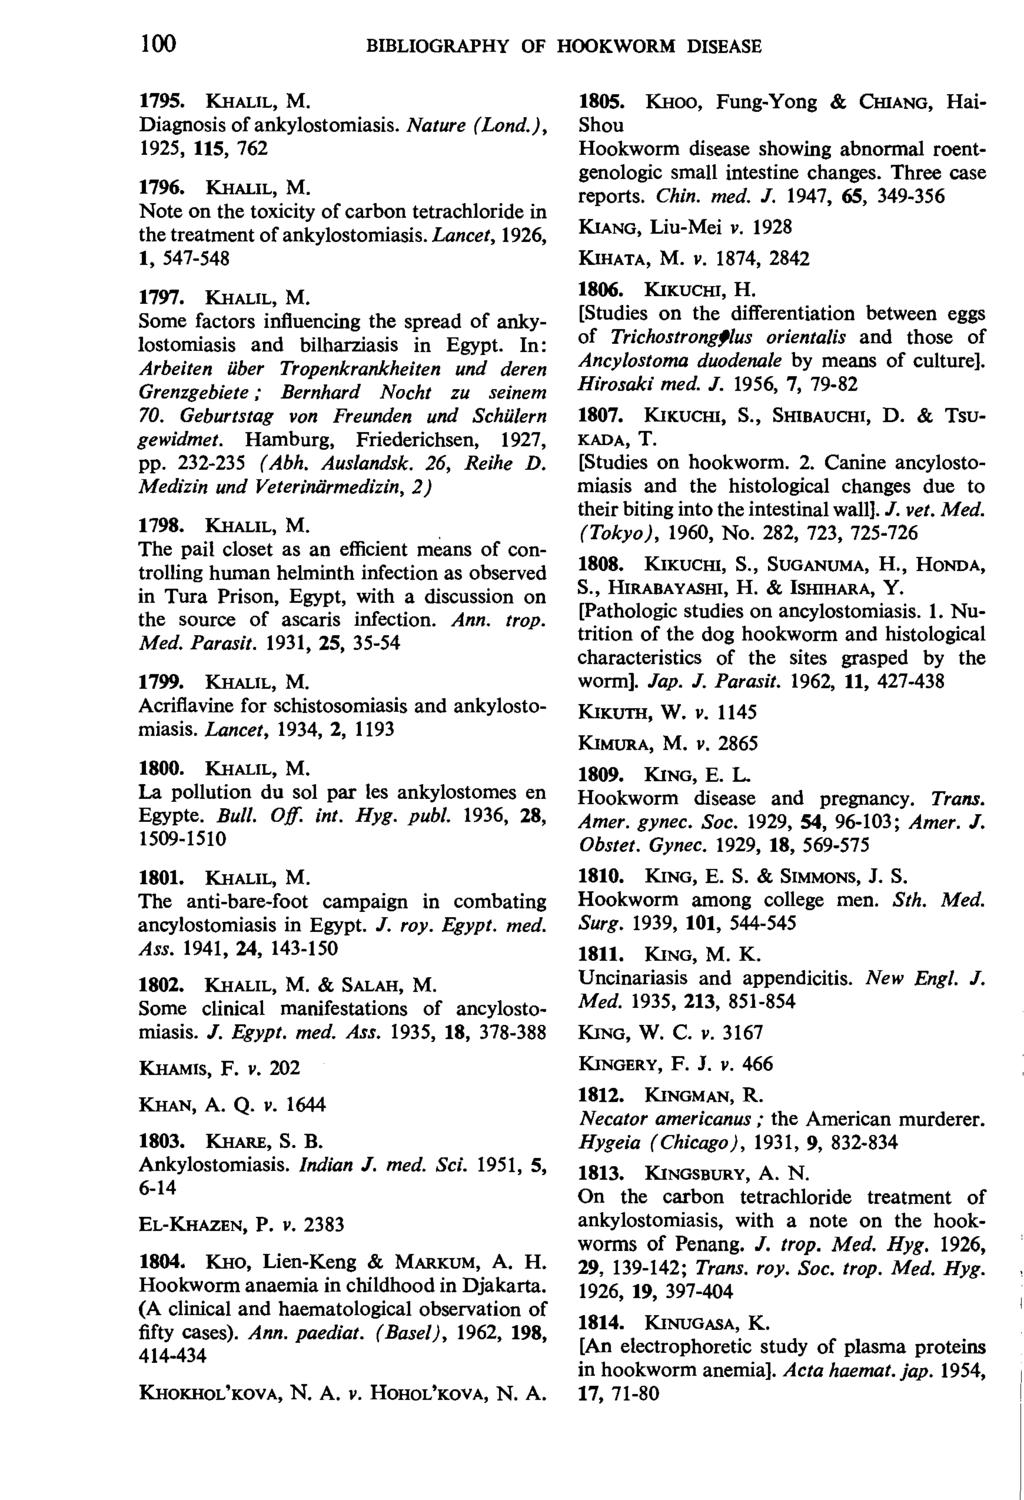 100 BIBLIOGRAPHY OF HOOKWORM DISEASE 1795. KHALIL, M. Diagnosis of ankylostomiasis. Nature (Lond.), 1925, 115, 762 1796. KHALIL, M. Note on the toxicity of carbon tetrachloride in the treatment of ankylostomiasis.